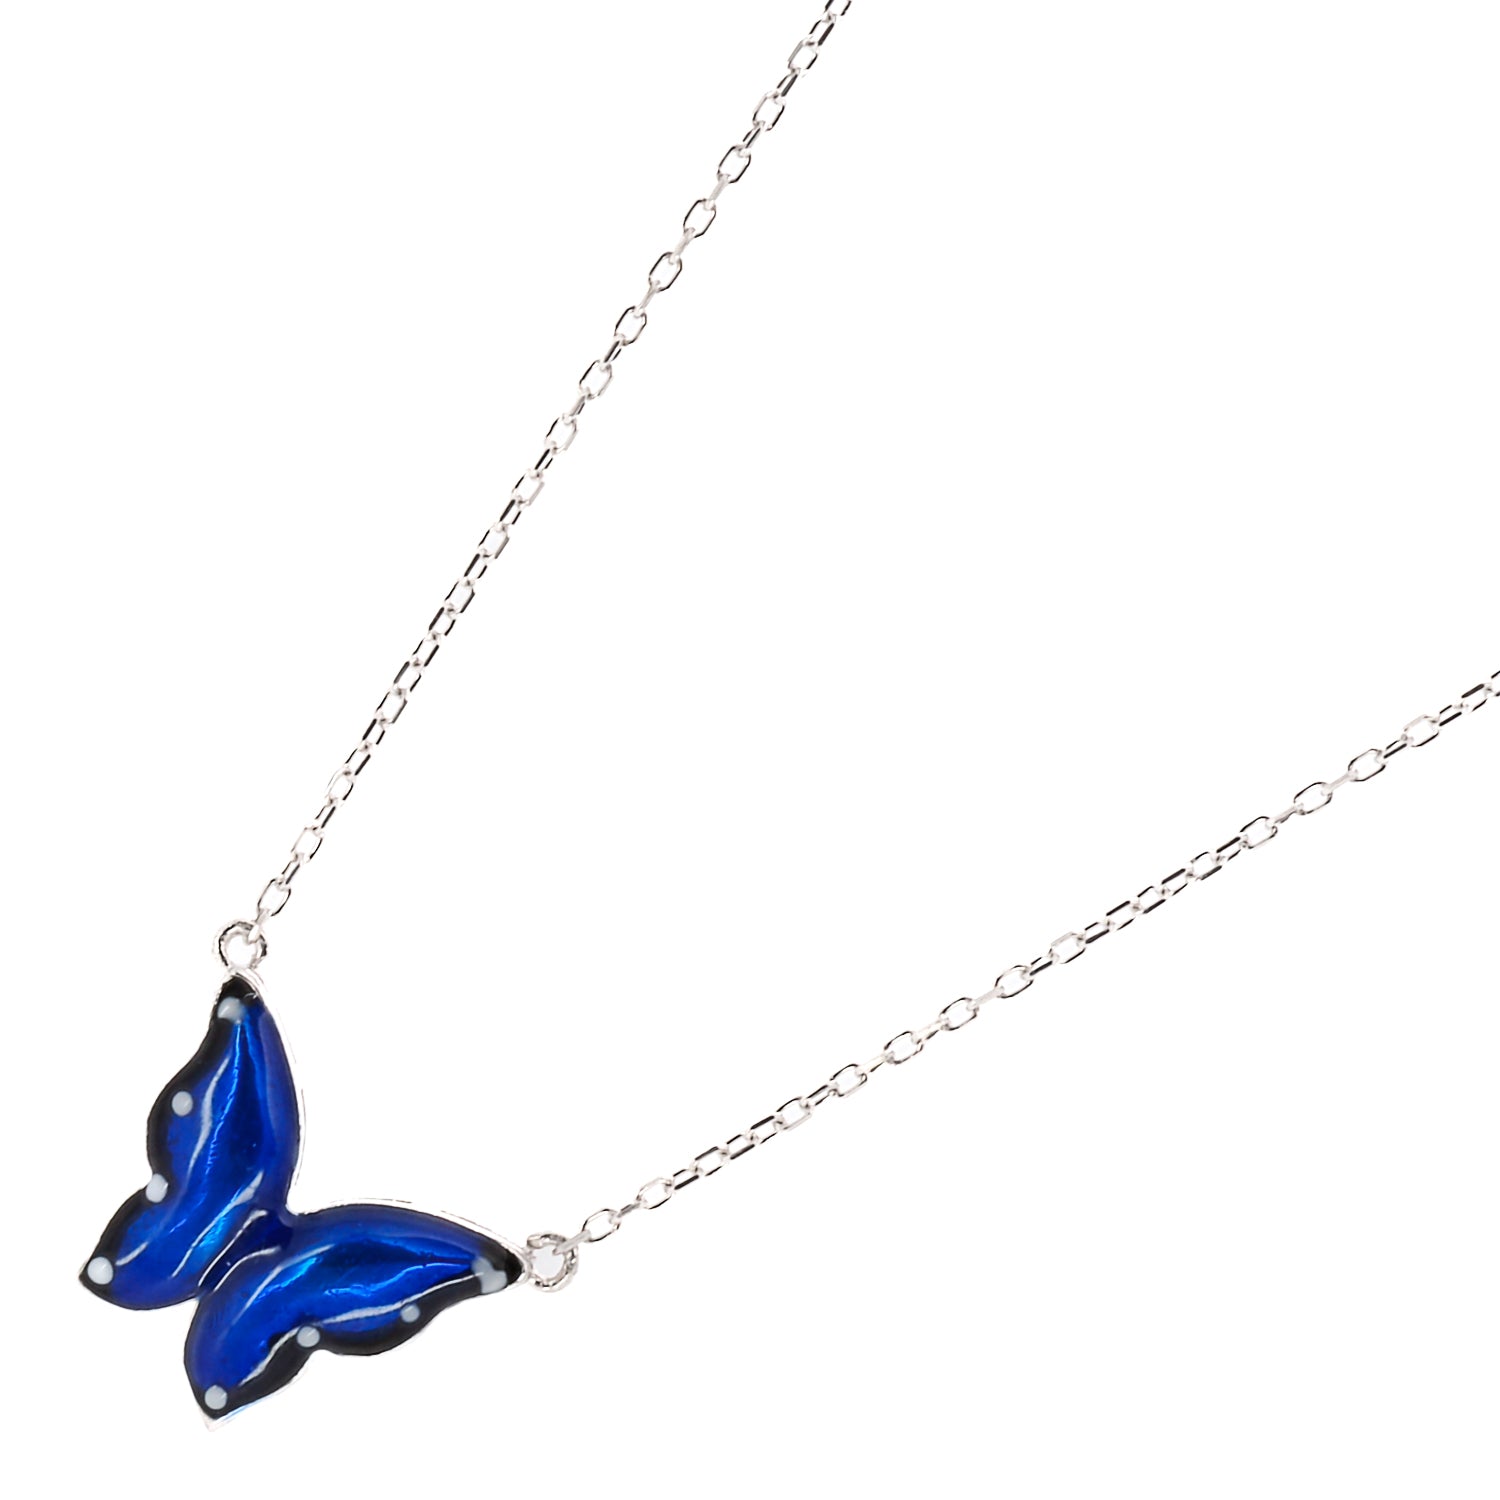 Stylish shot of the Silver Spiritual Blue Enamel Butterfly Necklace, adding a touch of spirituality and elegance to any outfit.